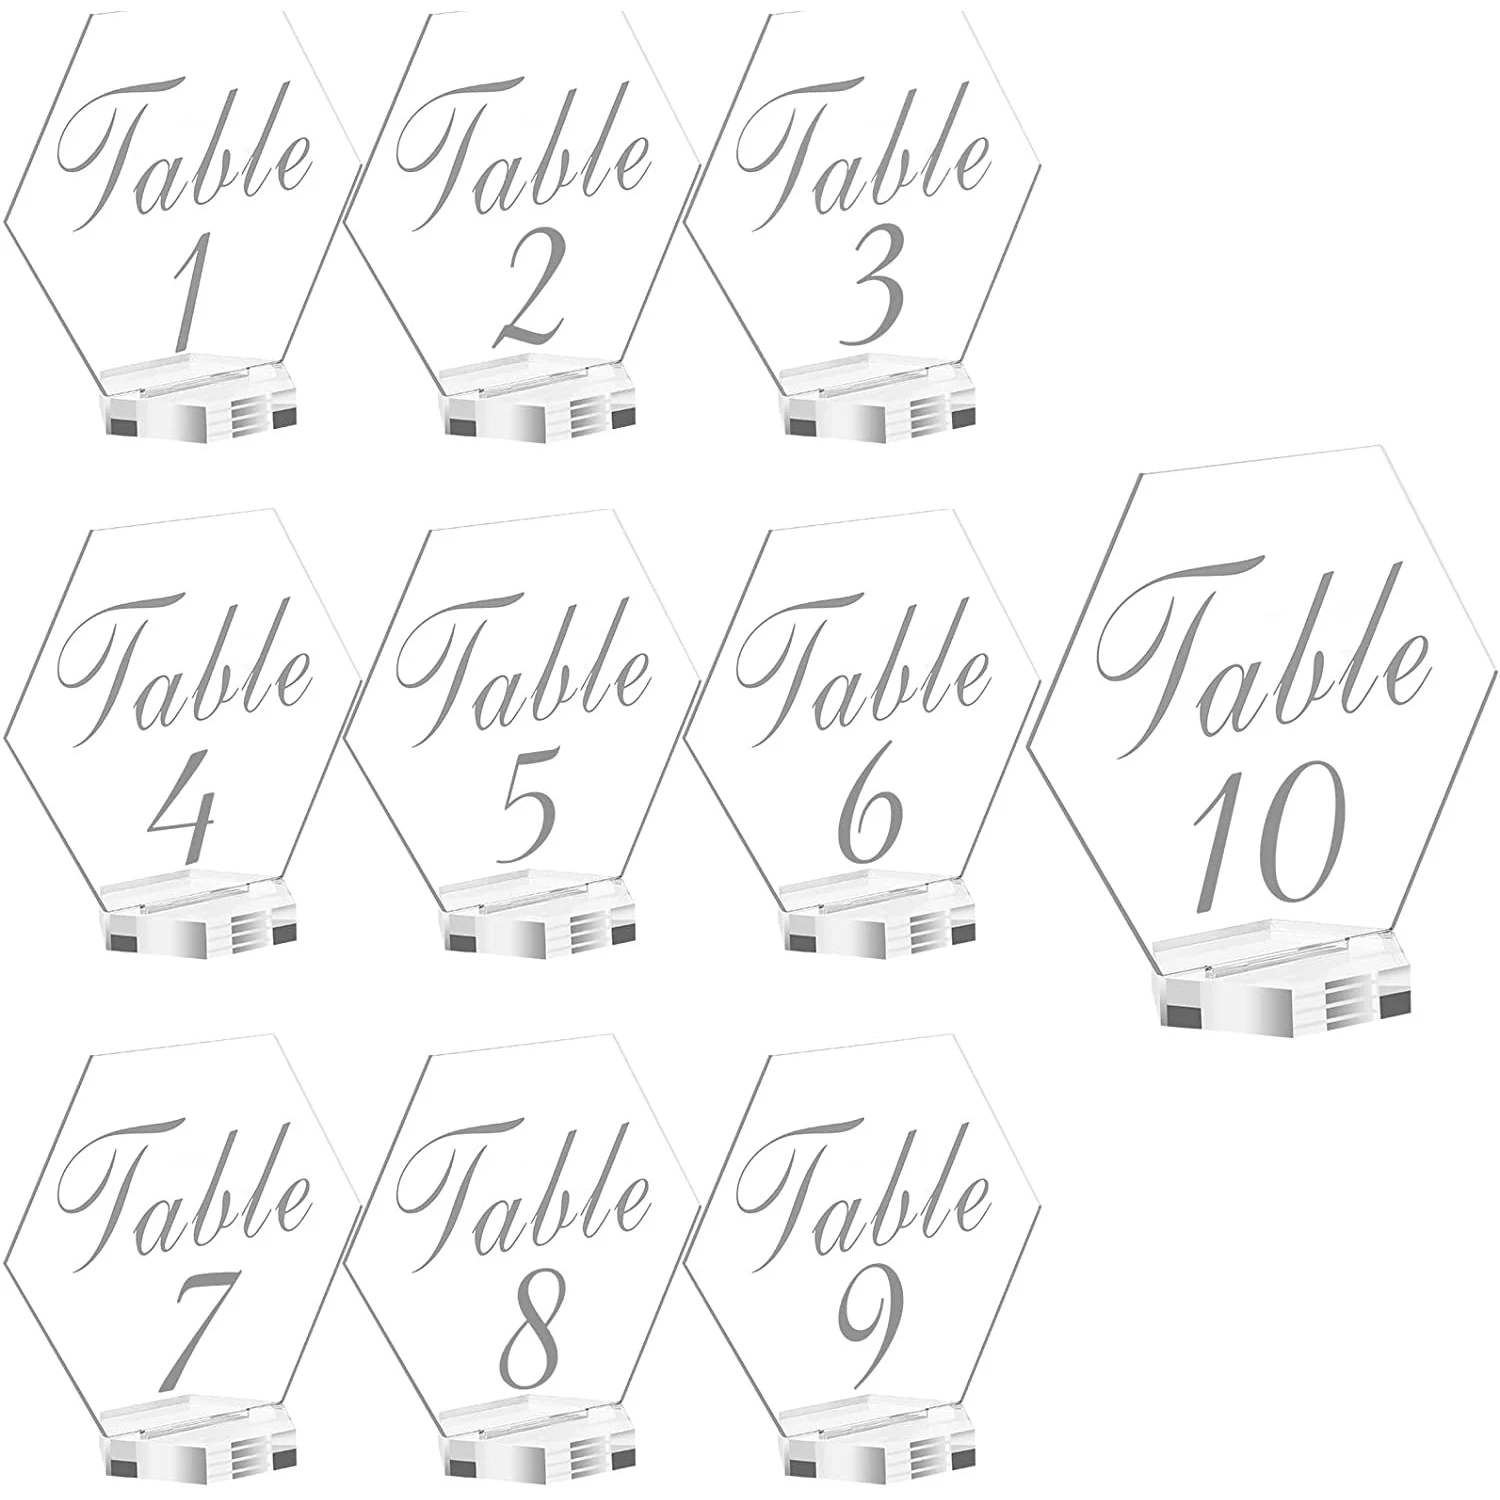 

Acrylic Signs for Wedding Blank Wedding Table Number Hexagon Tiles Wedding Place Card for Banquet Wedding Reception Party Decor